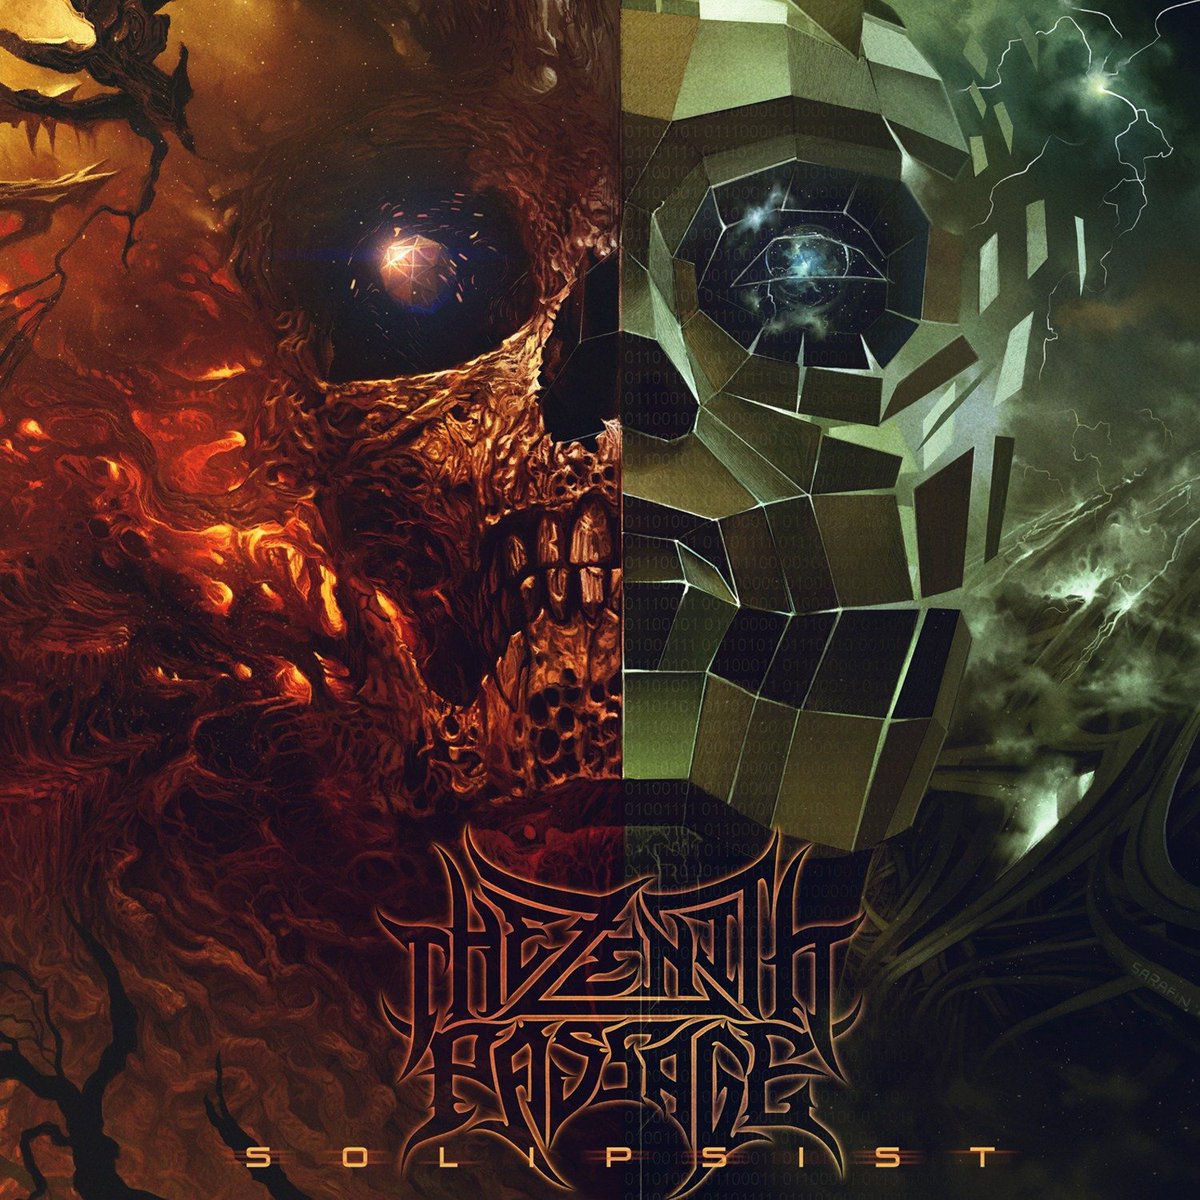 The Zenith Passage - Simulated Reality

#nowplaying #music #metal #thezenithpassage #technicaldeathmetal